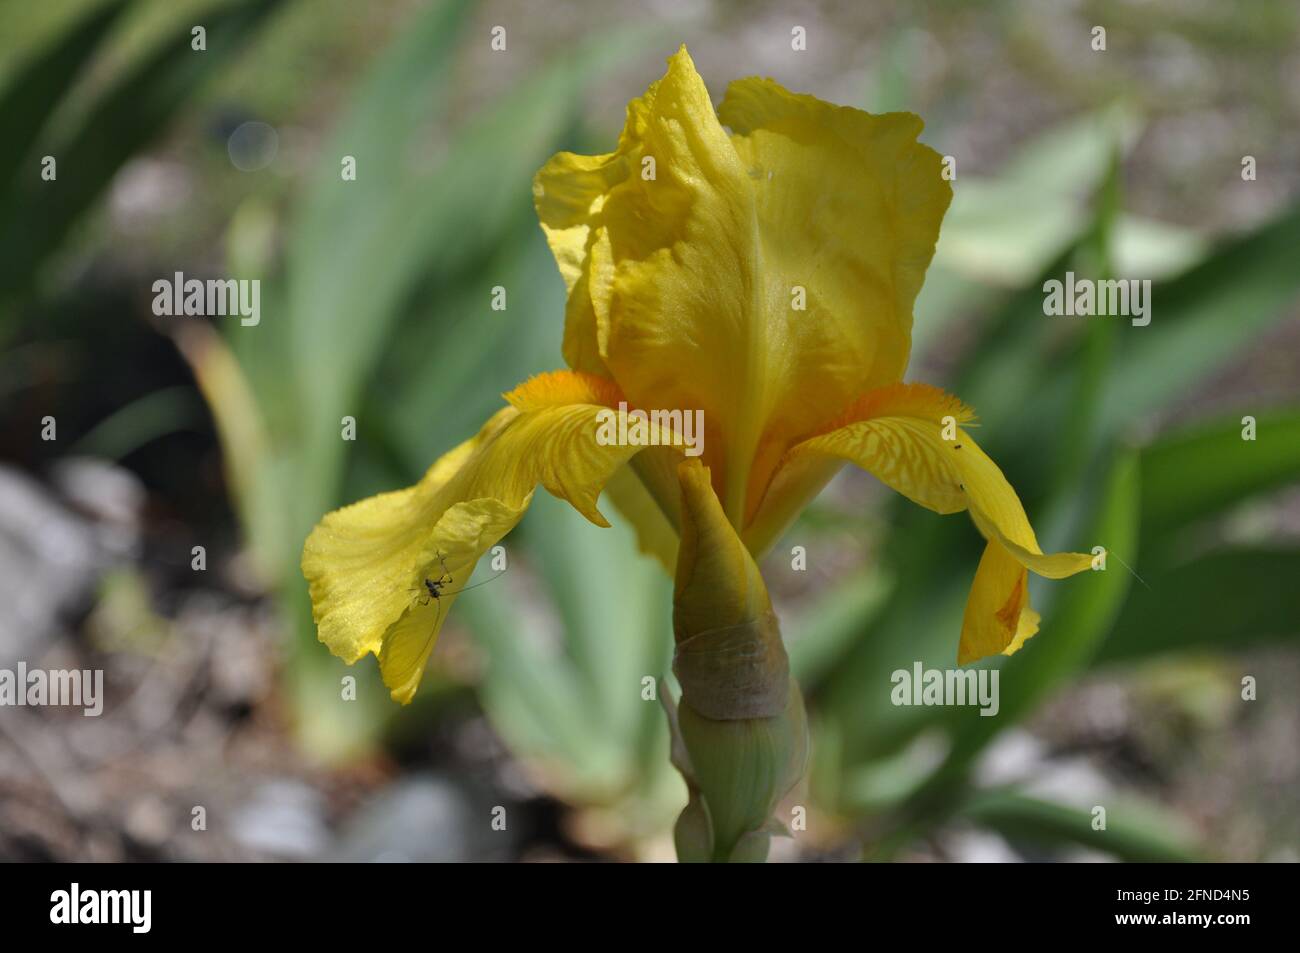 Iris flower with green leaves. Yellow bearded iris blooming in spring time on an overcast day Stock Photo